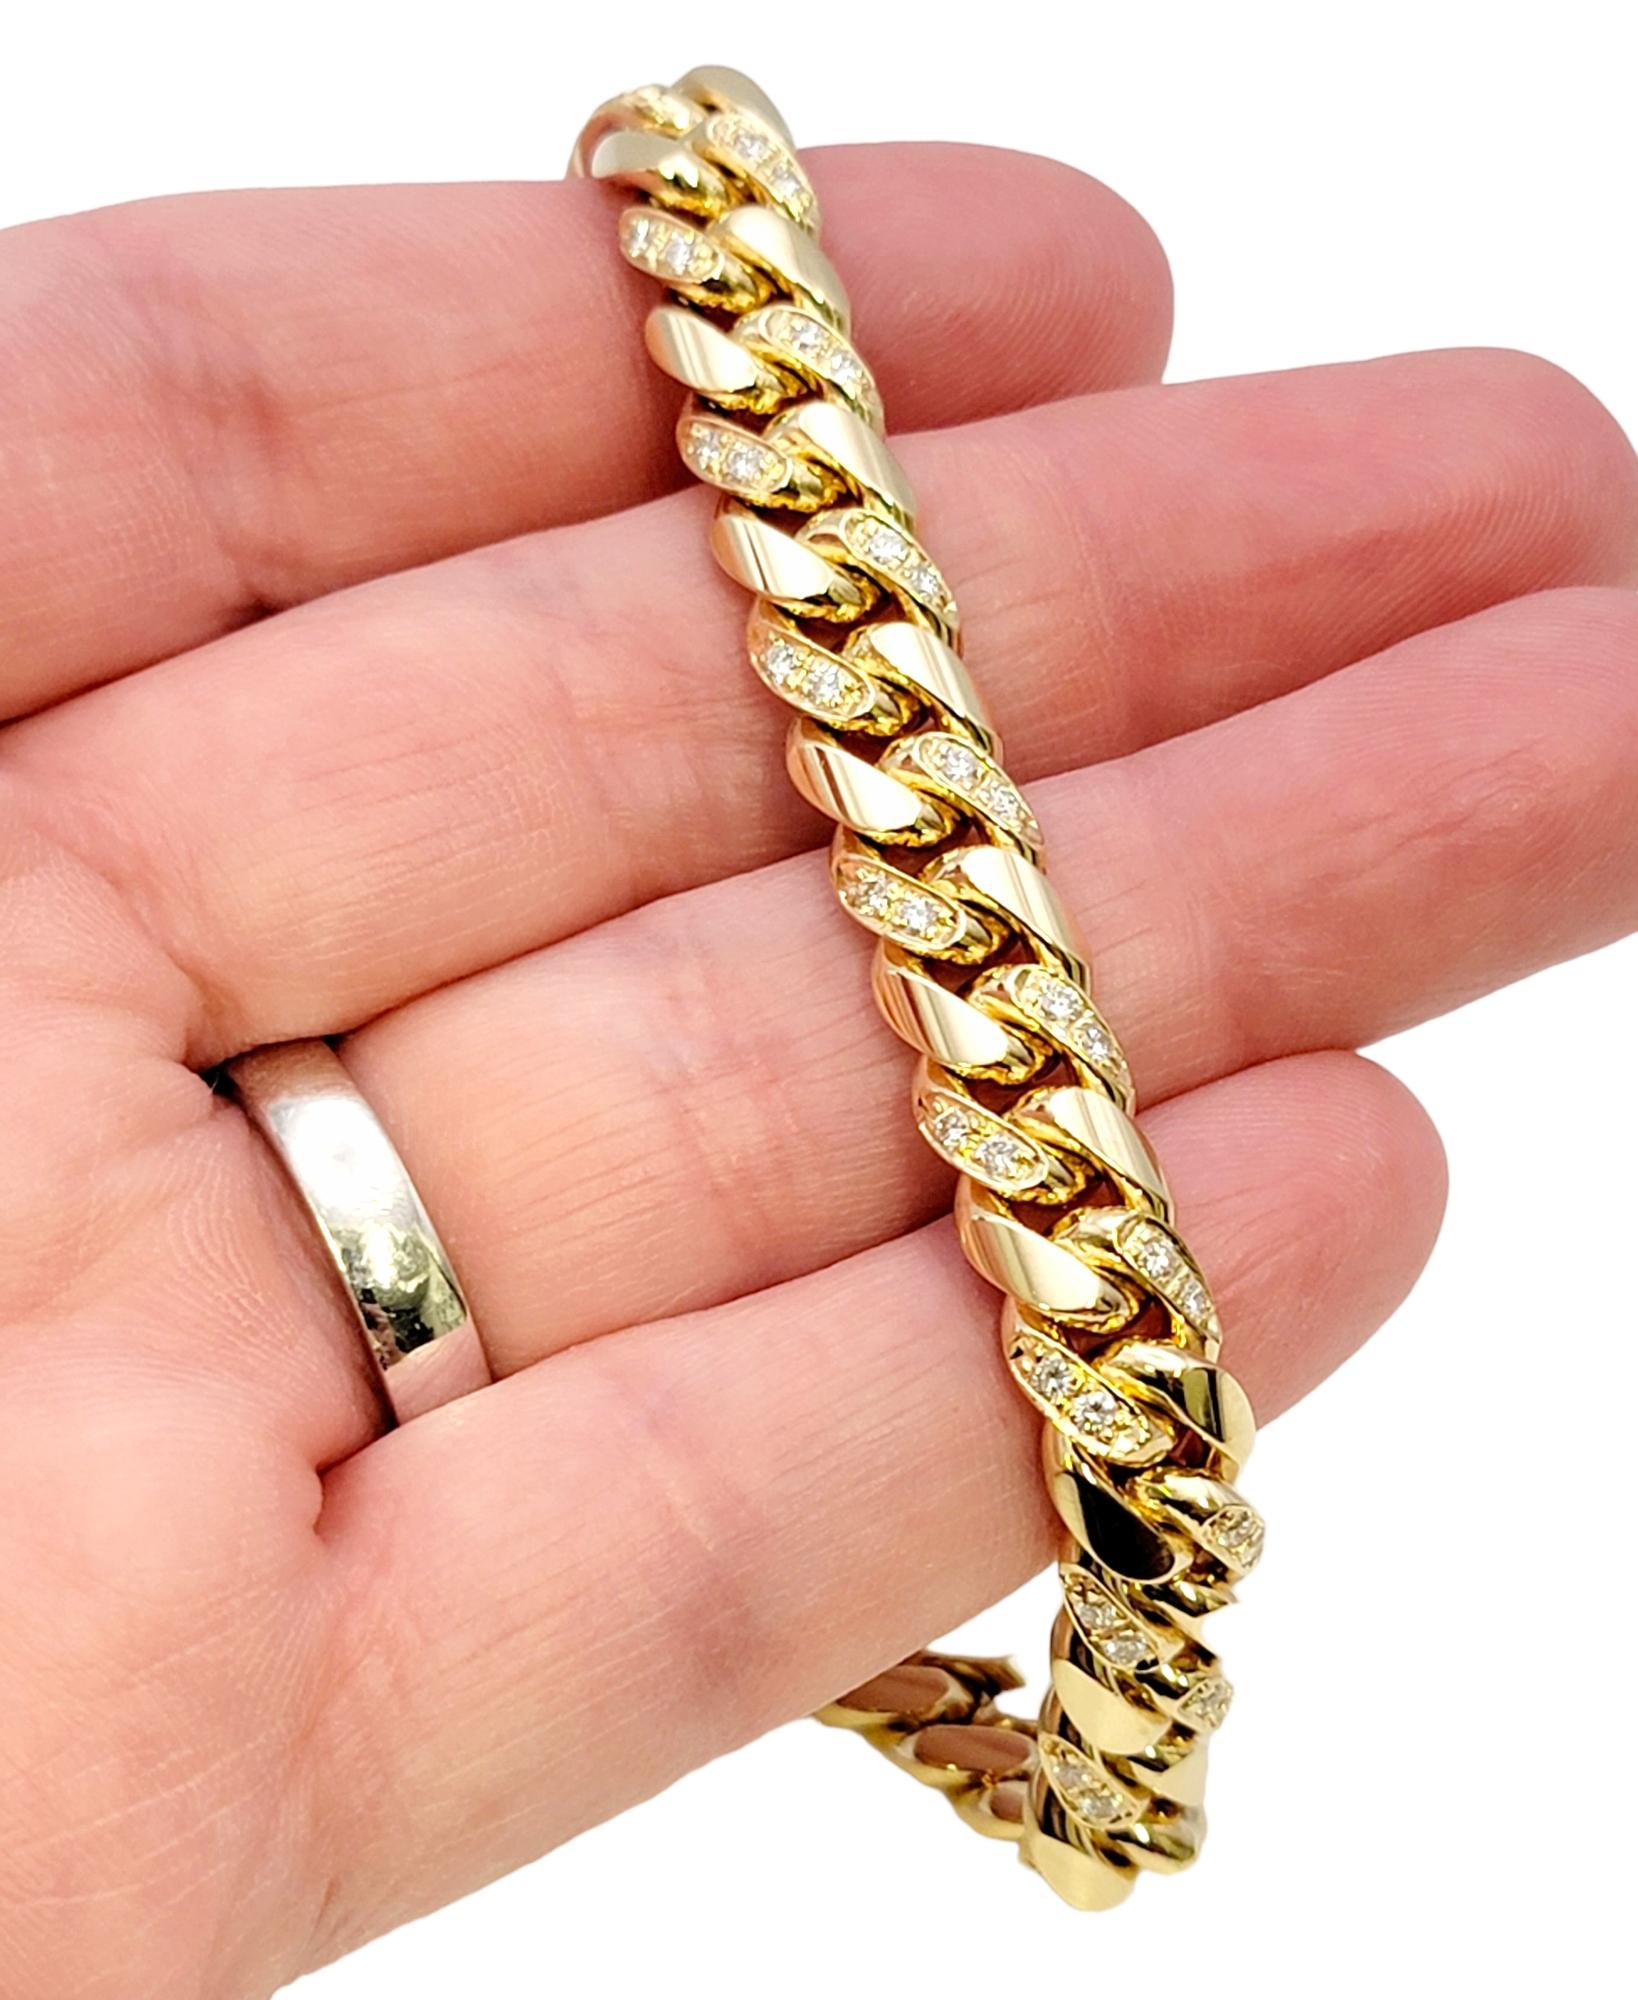 Unisex 14 Karat Yellow Gold Curb Link Bracelet with Pave Diamond Accents For Sale 9